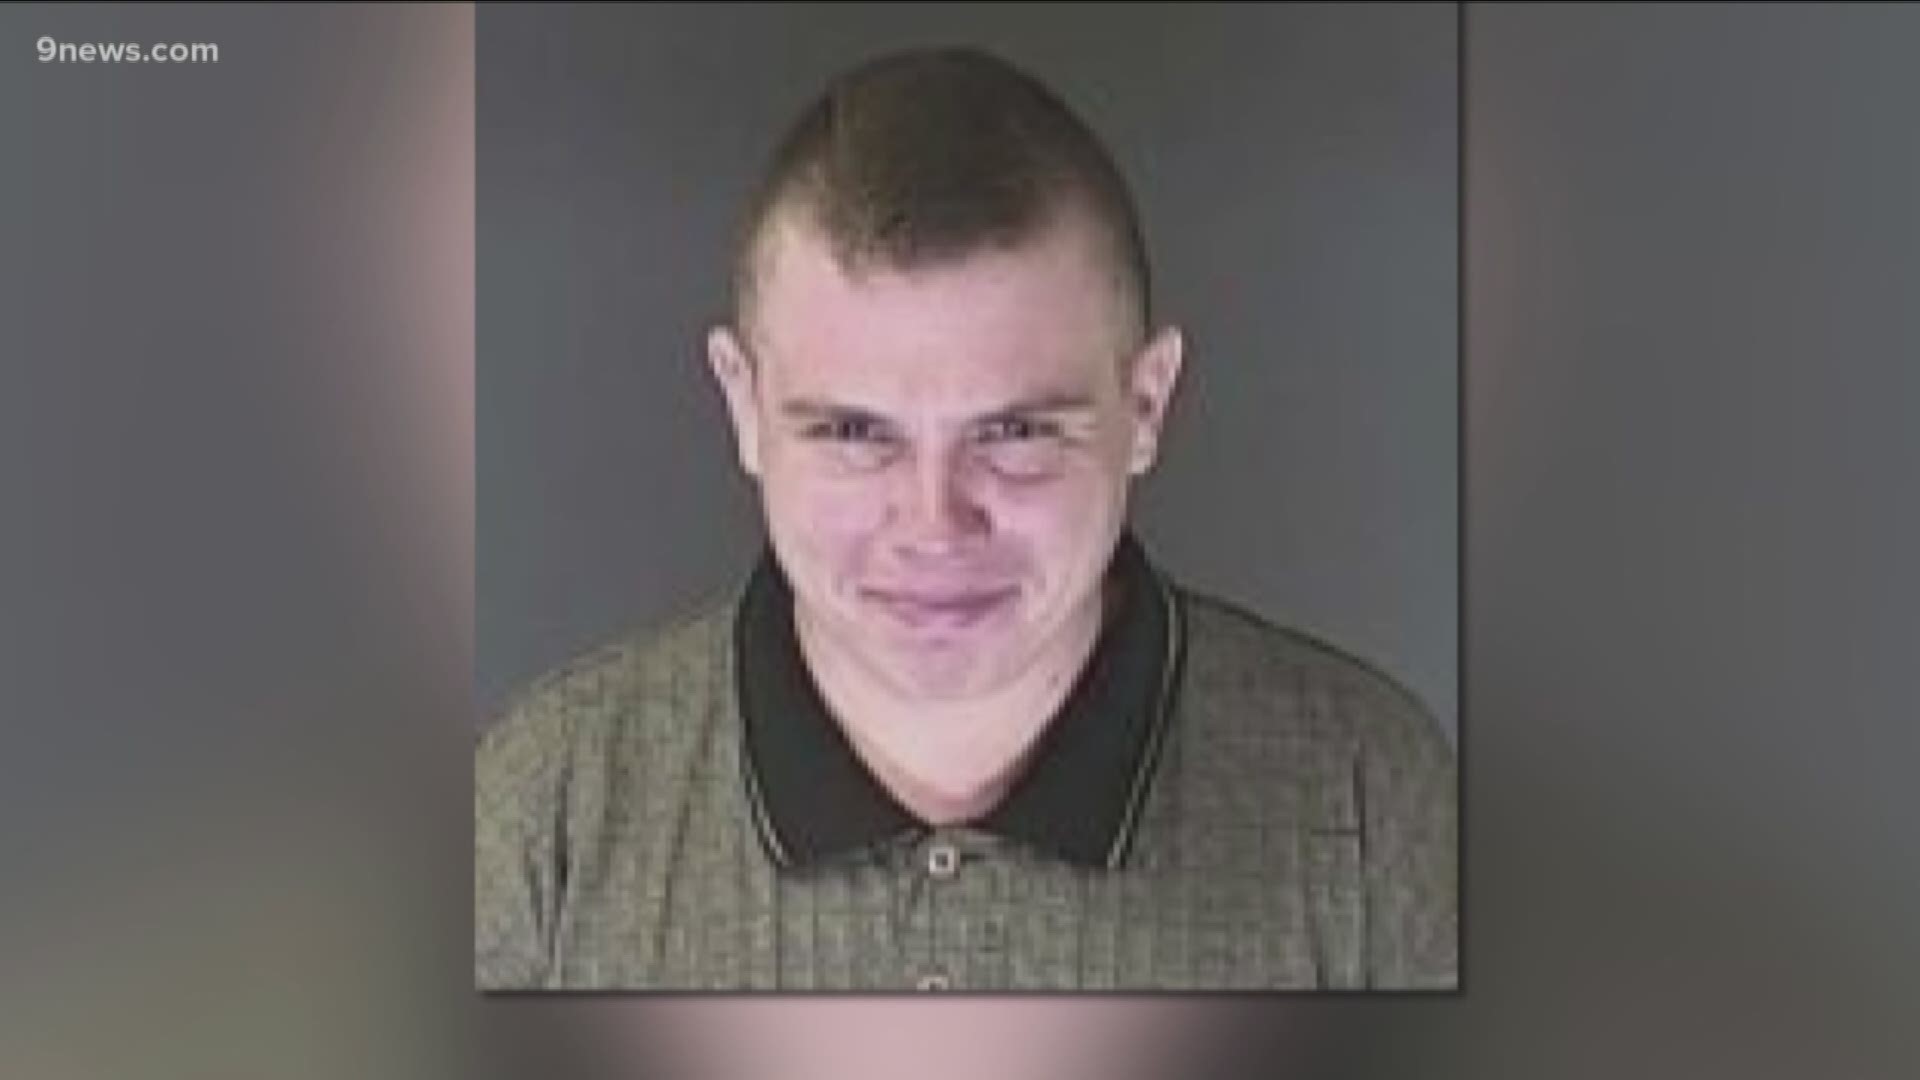 Richard Holzer was arrested Nov. 1 and is accused of plotting to bomb Temple Emanuel in Pueblo.